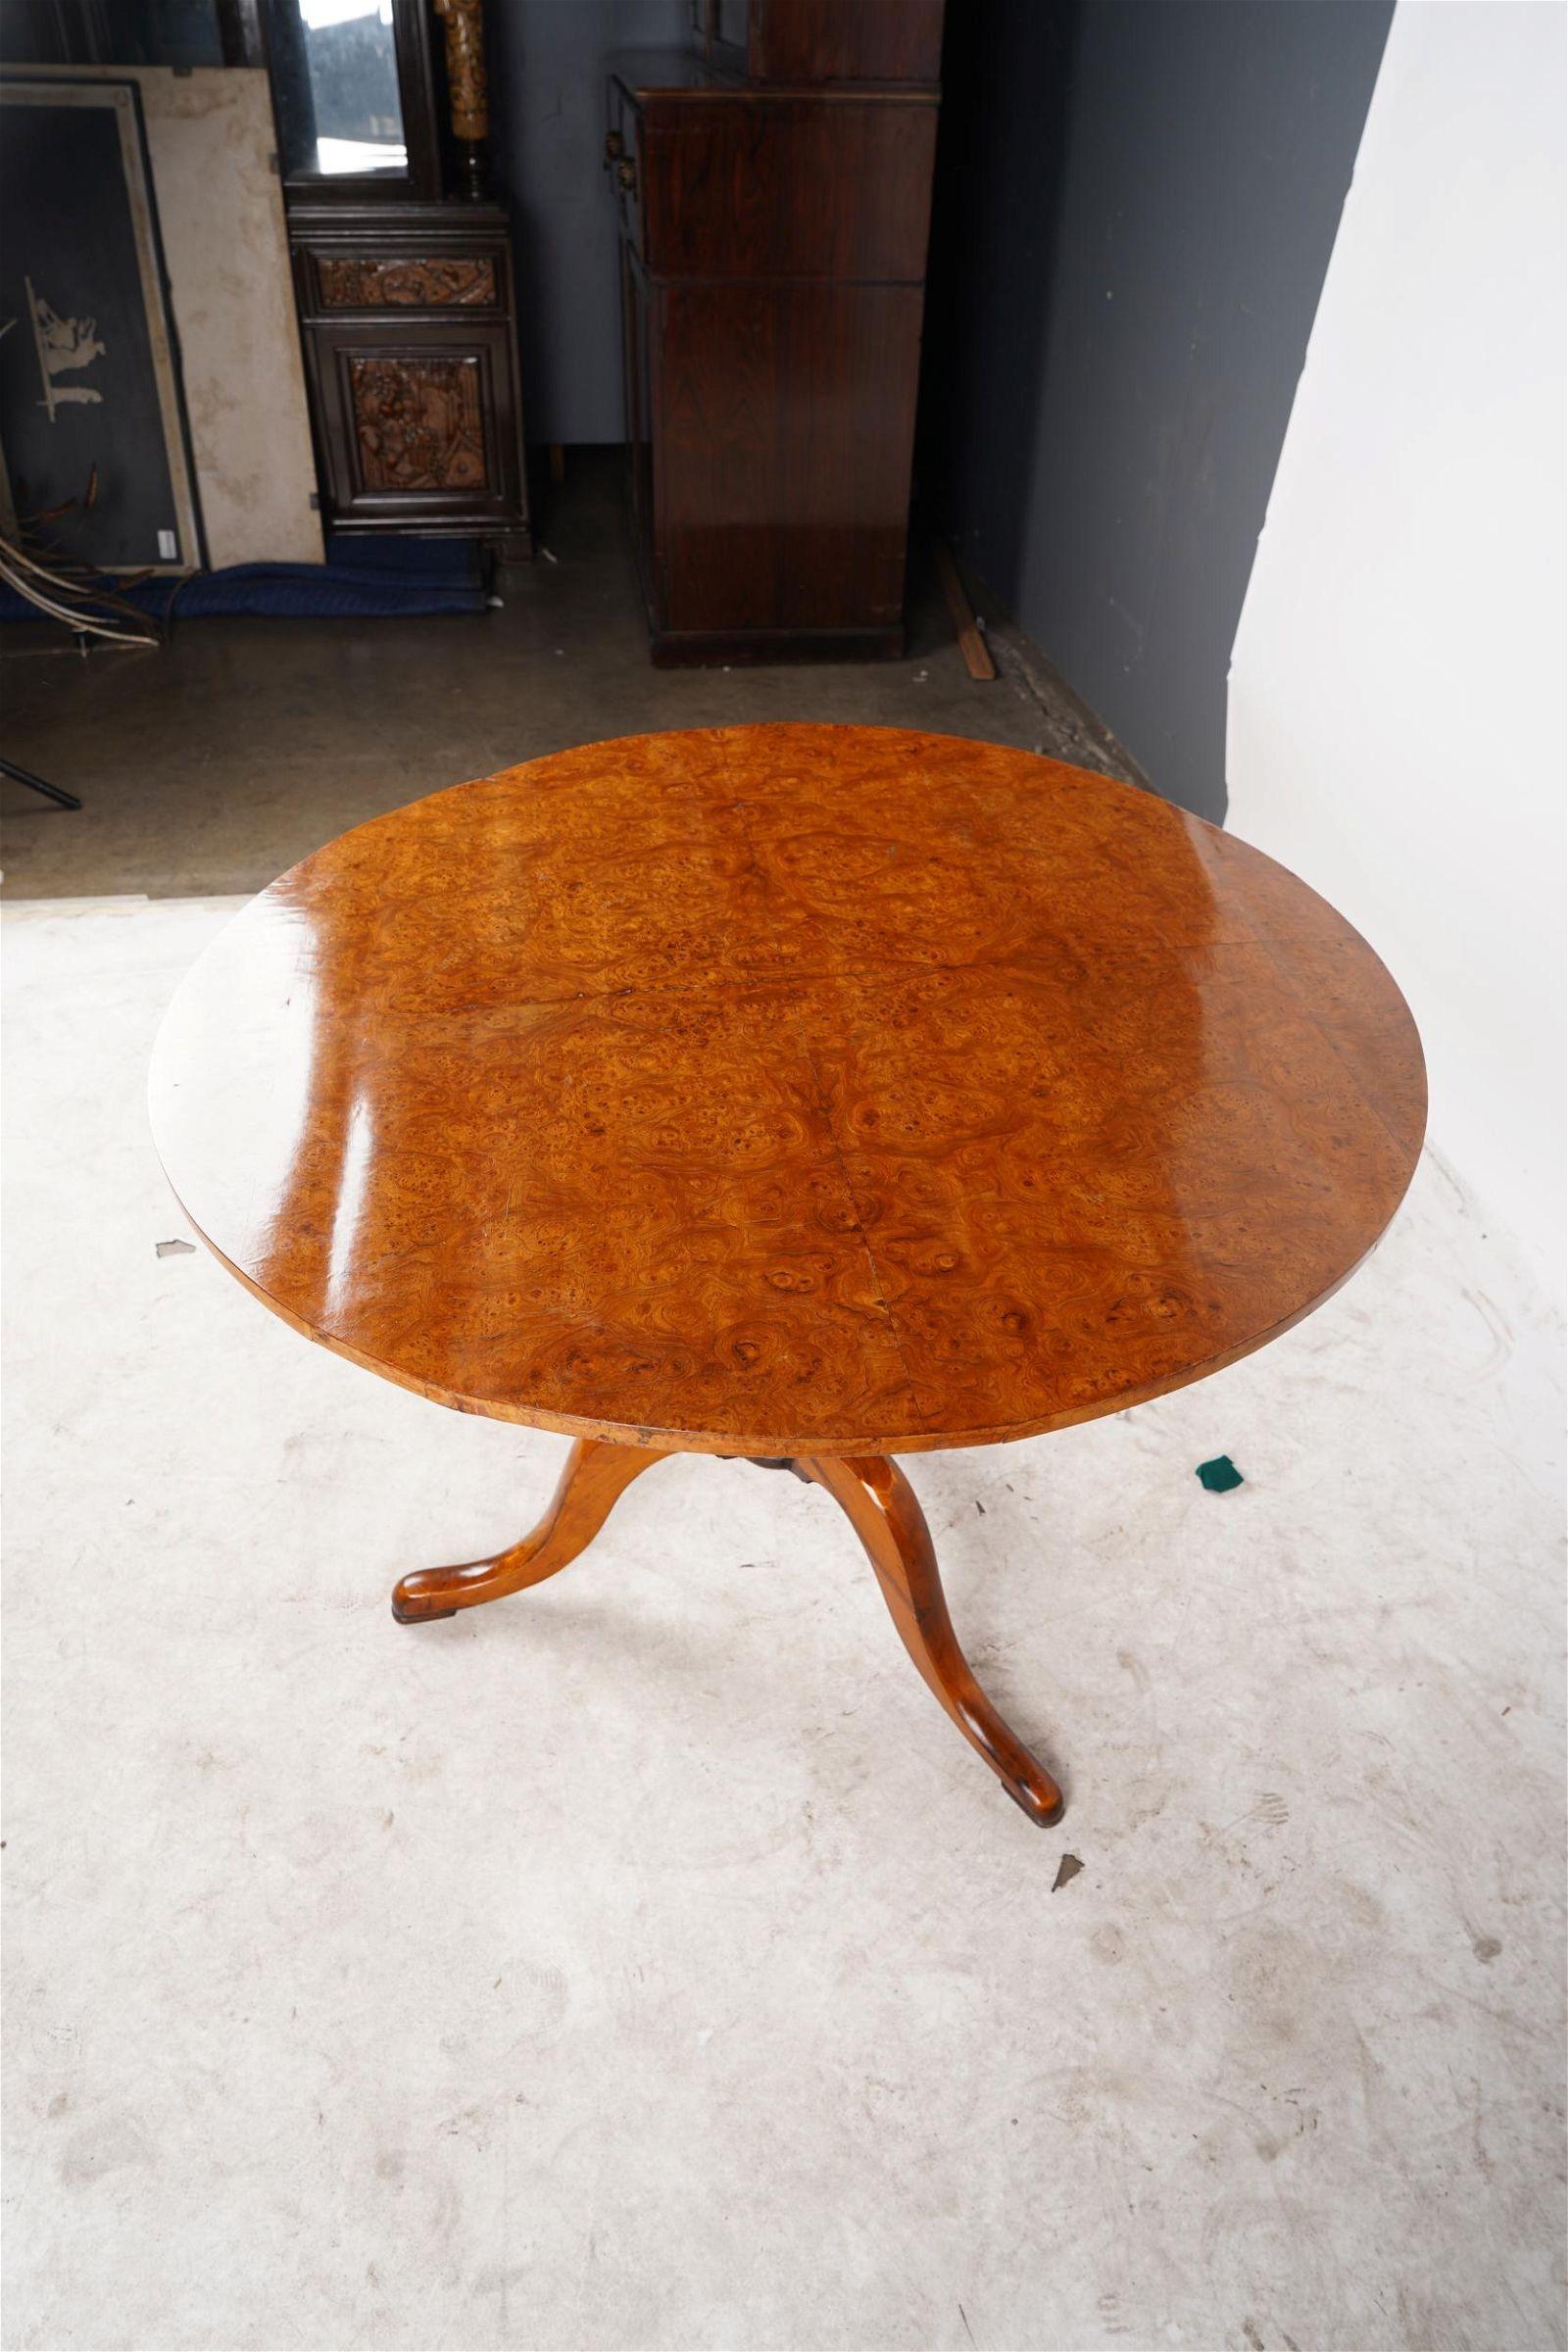 Antique Period American Federal Period Maple Tilt Top Side Table Late 18th C For Sale 1